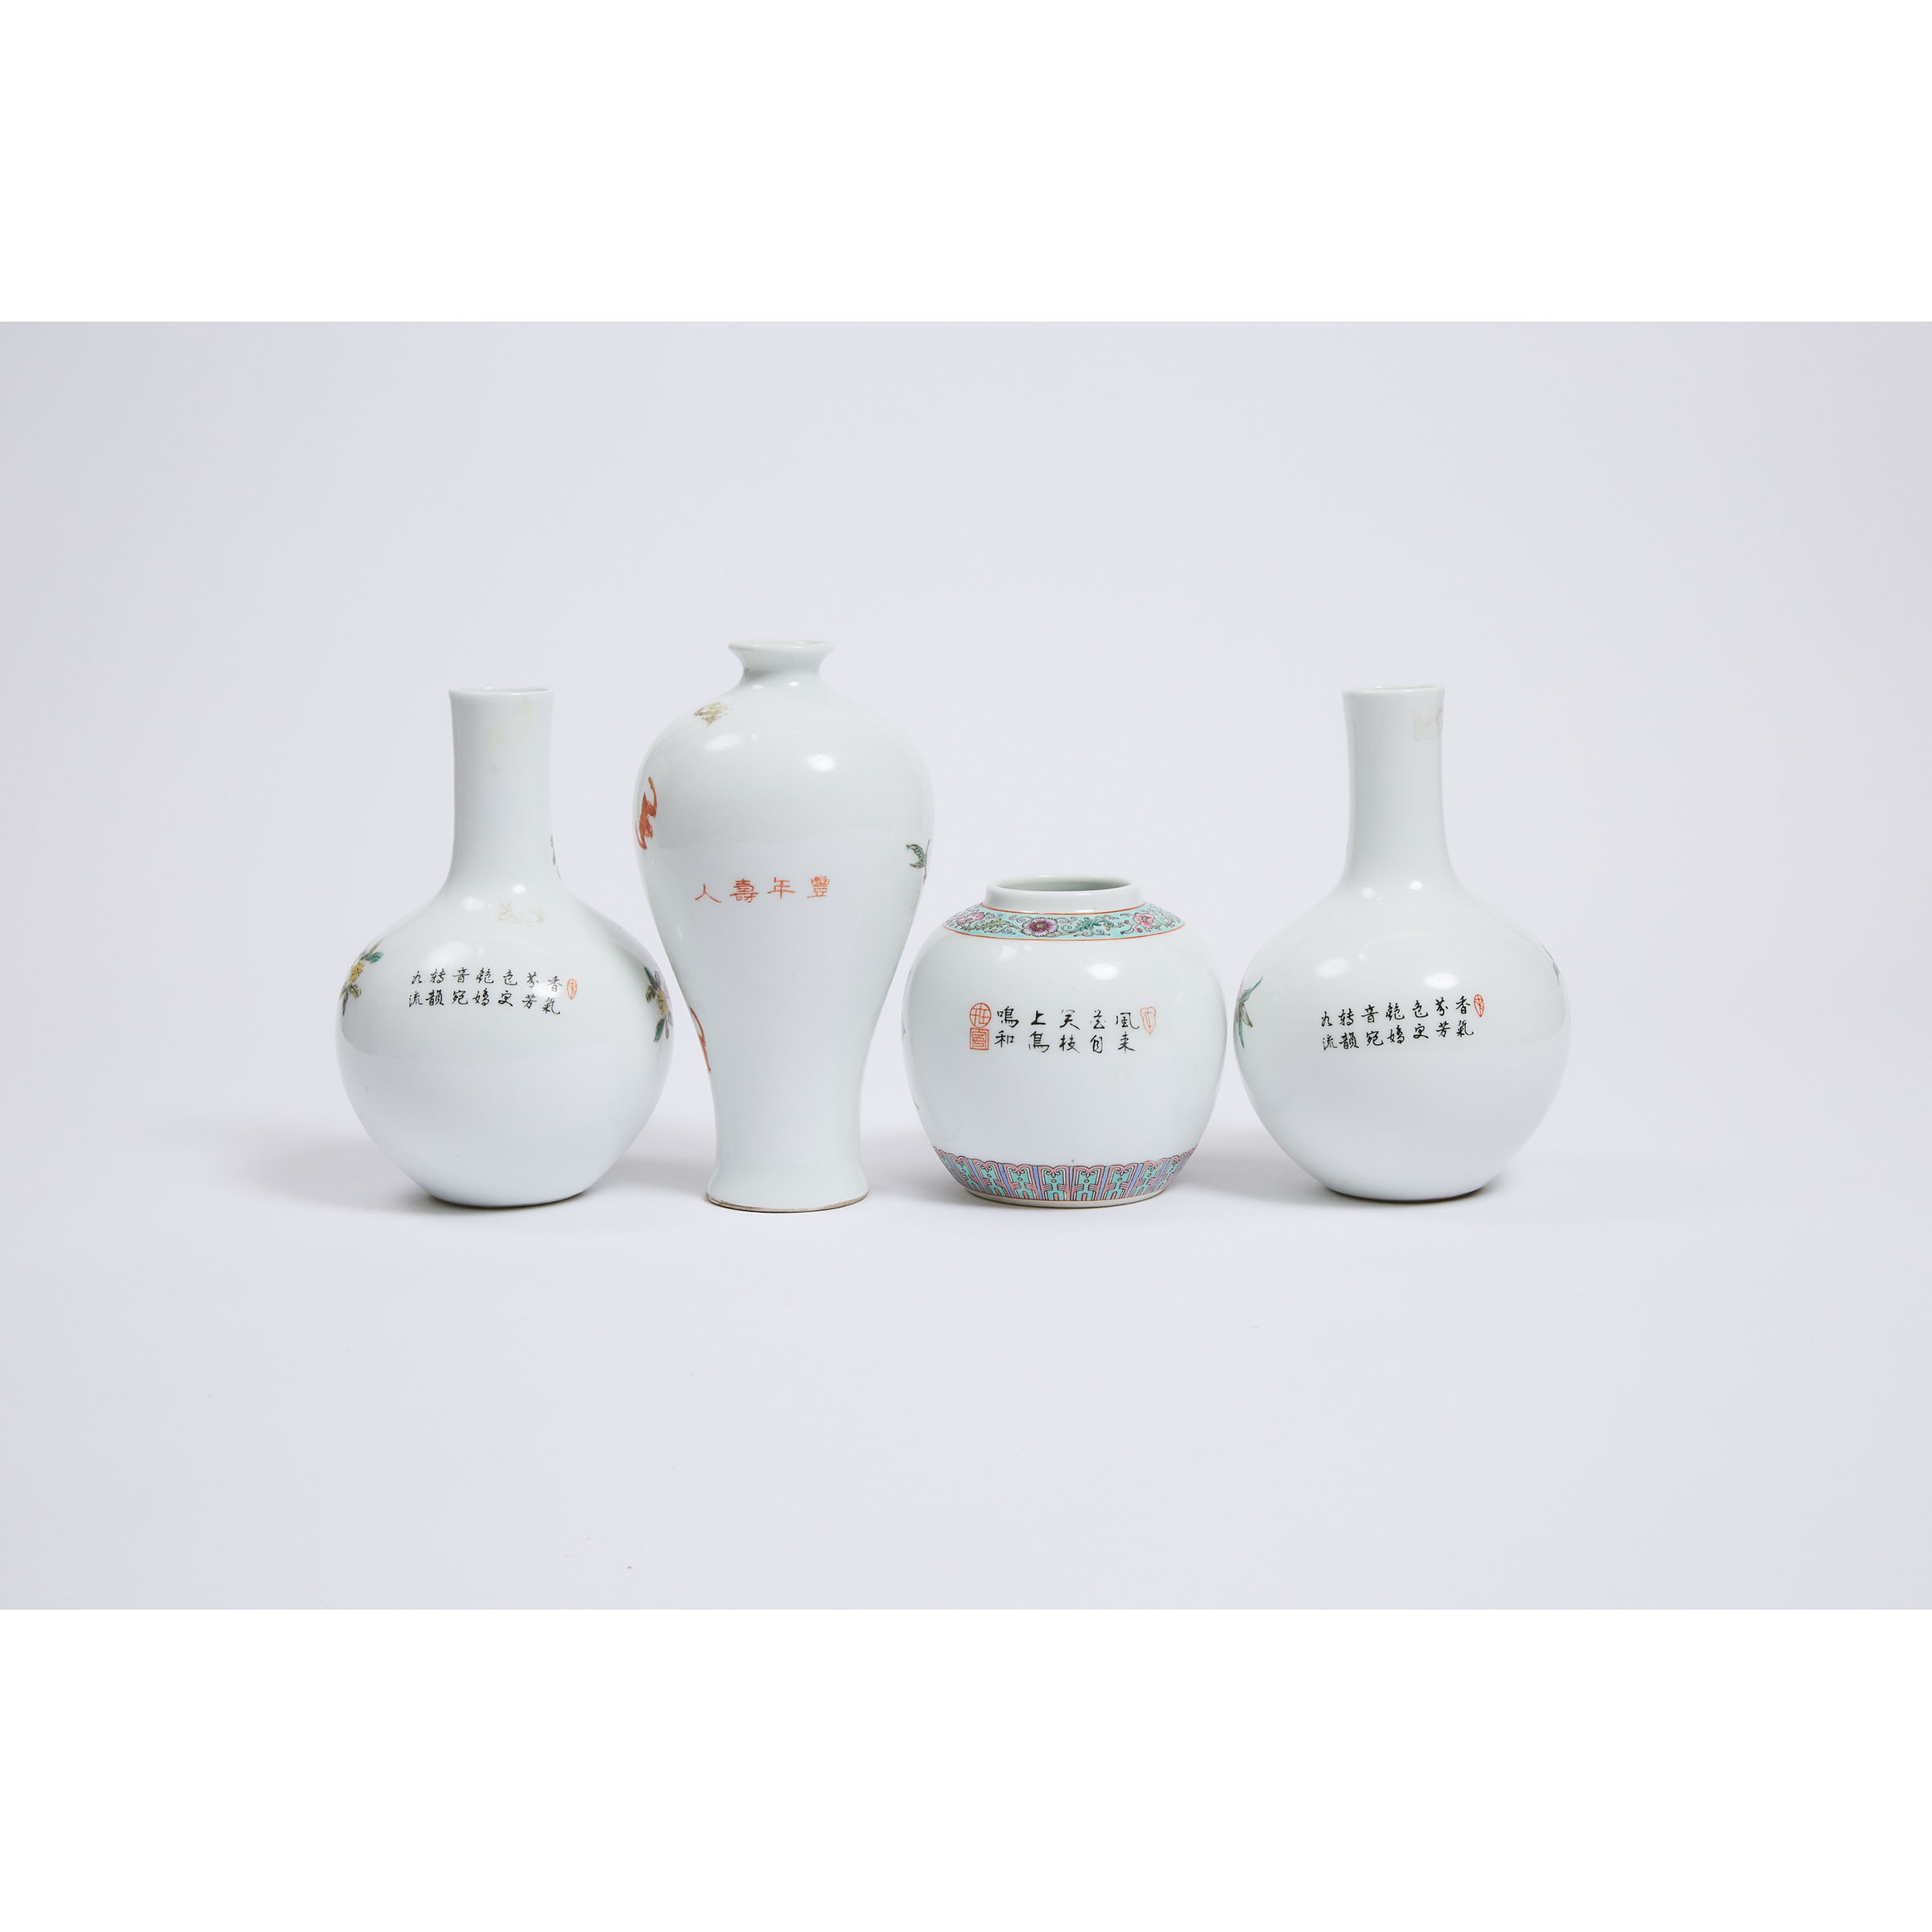 A Group of Four Miniature Famille Rose Porcelain Vases, 20th Century